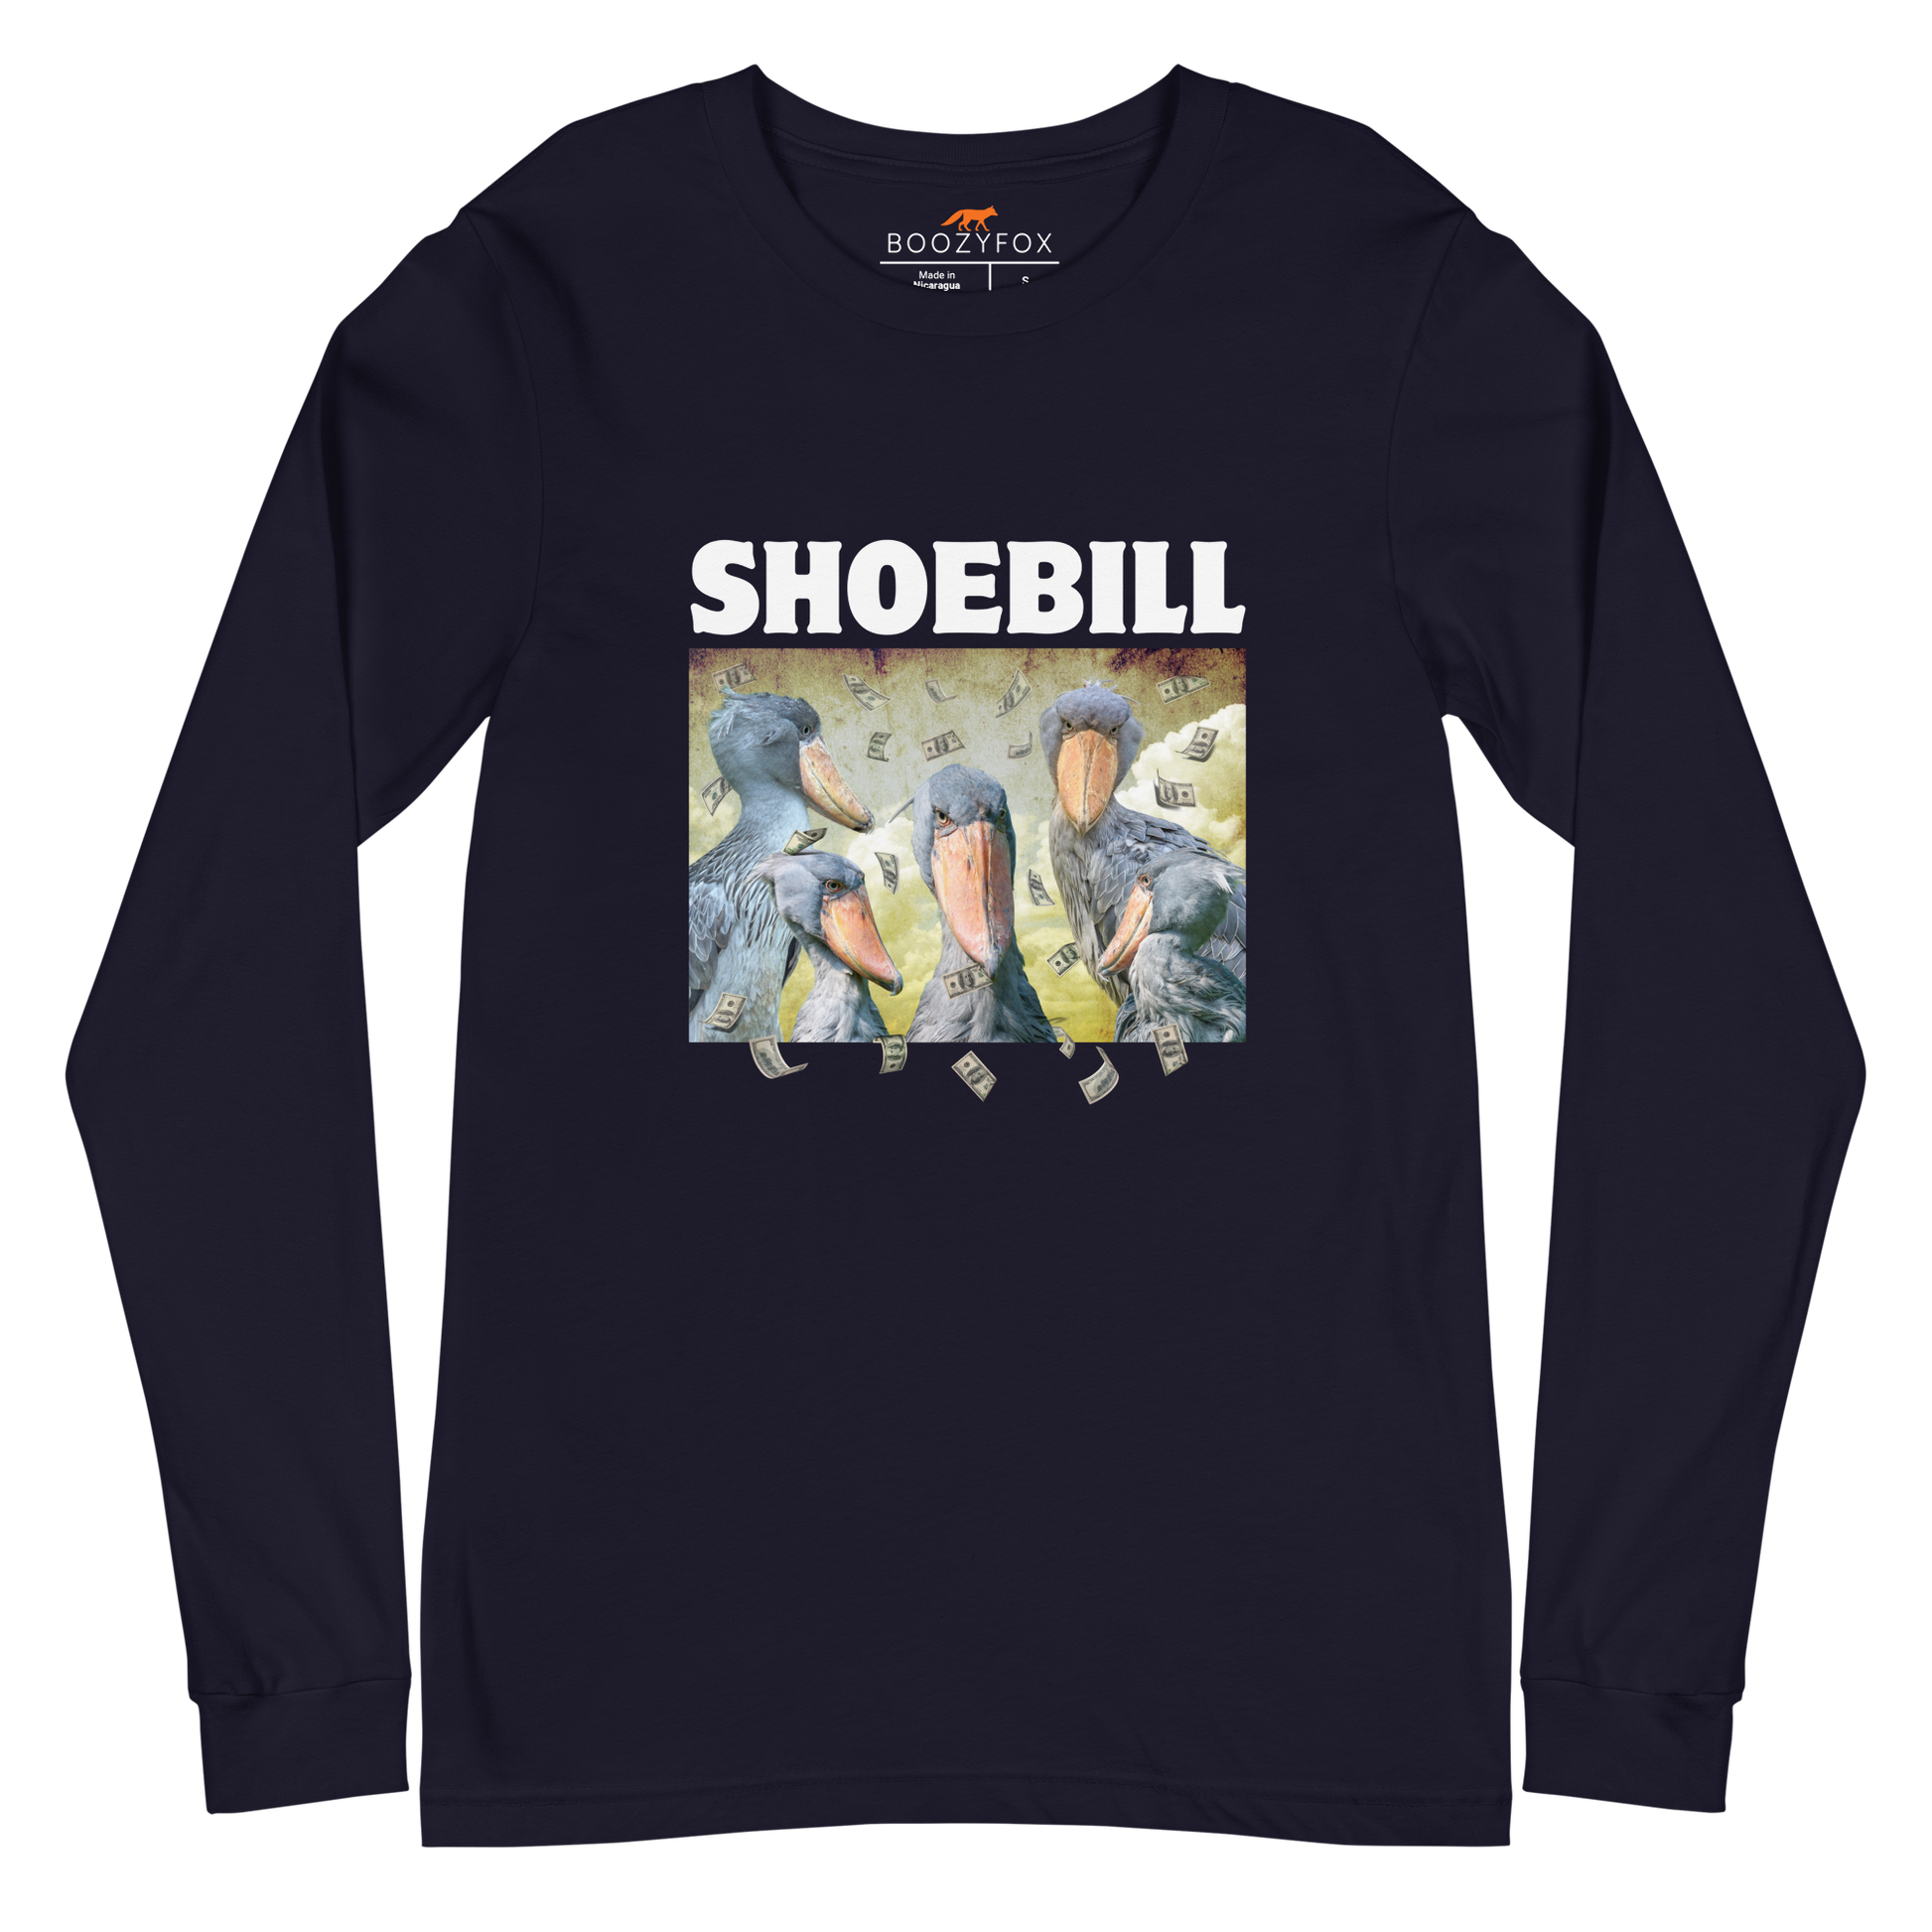 Navy Shoebill Stork Long Sleeve Tee featuring cool Shoebill graphic on the chest - Artsy/Funny Shoebill Stork Long Sleeve Graphic Tees - Boozy Fox